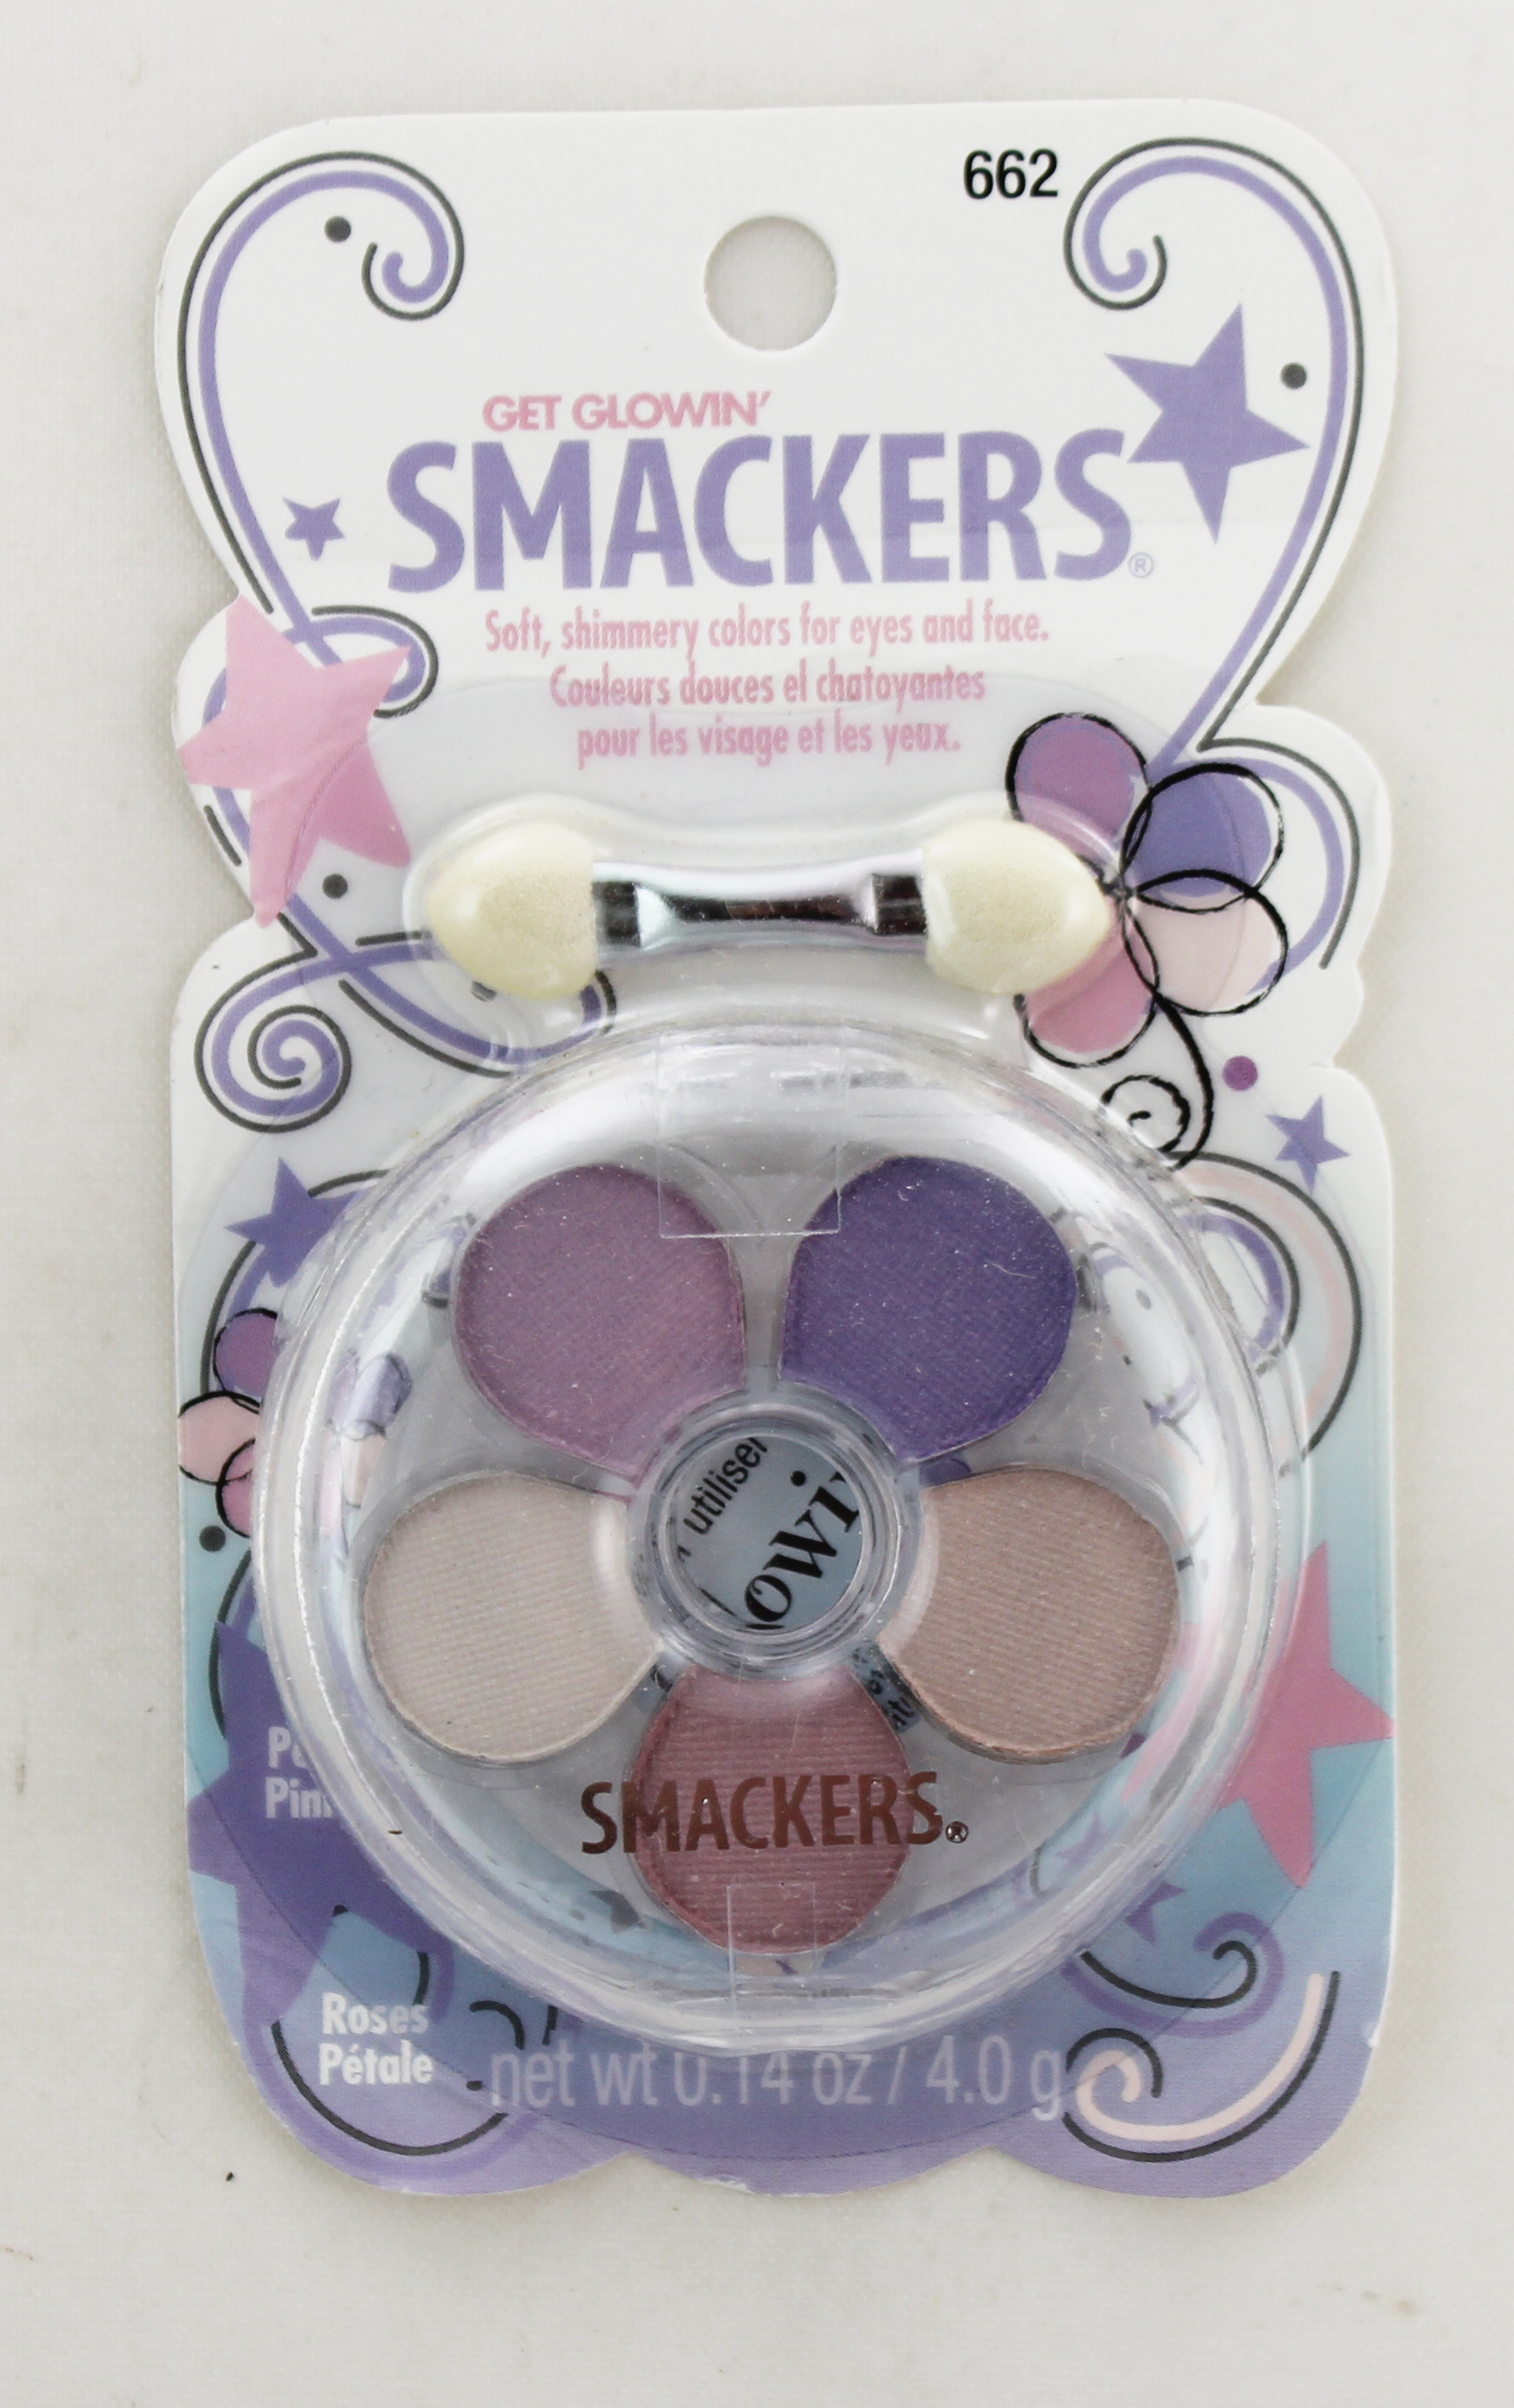 Lip Smackers Dazzle Dust Shimmer Powder For Face and Body With Applicator :  Wholesale fashion accessories and jewelry, bows - clips - scrunchies -  twisters - keychains - bracelets - necklaces - toe rings - bandanas -  brushes and more